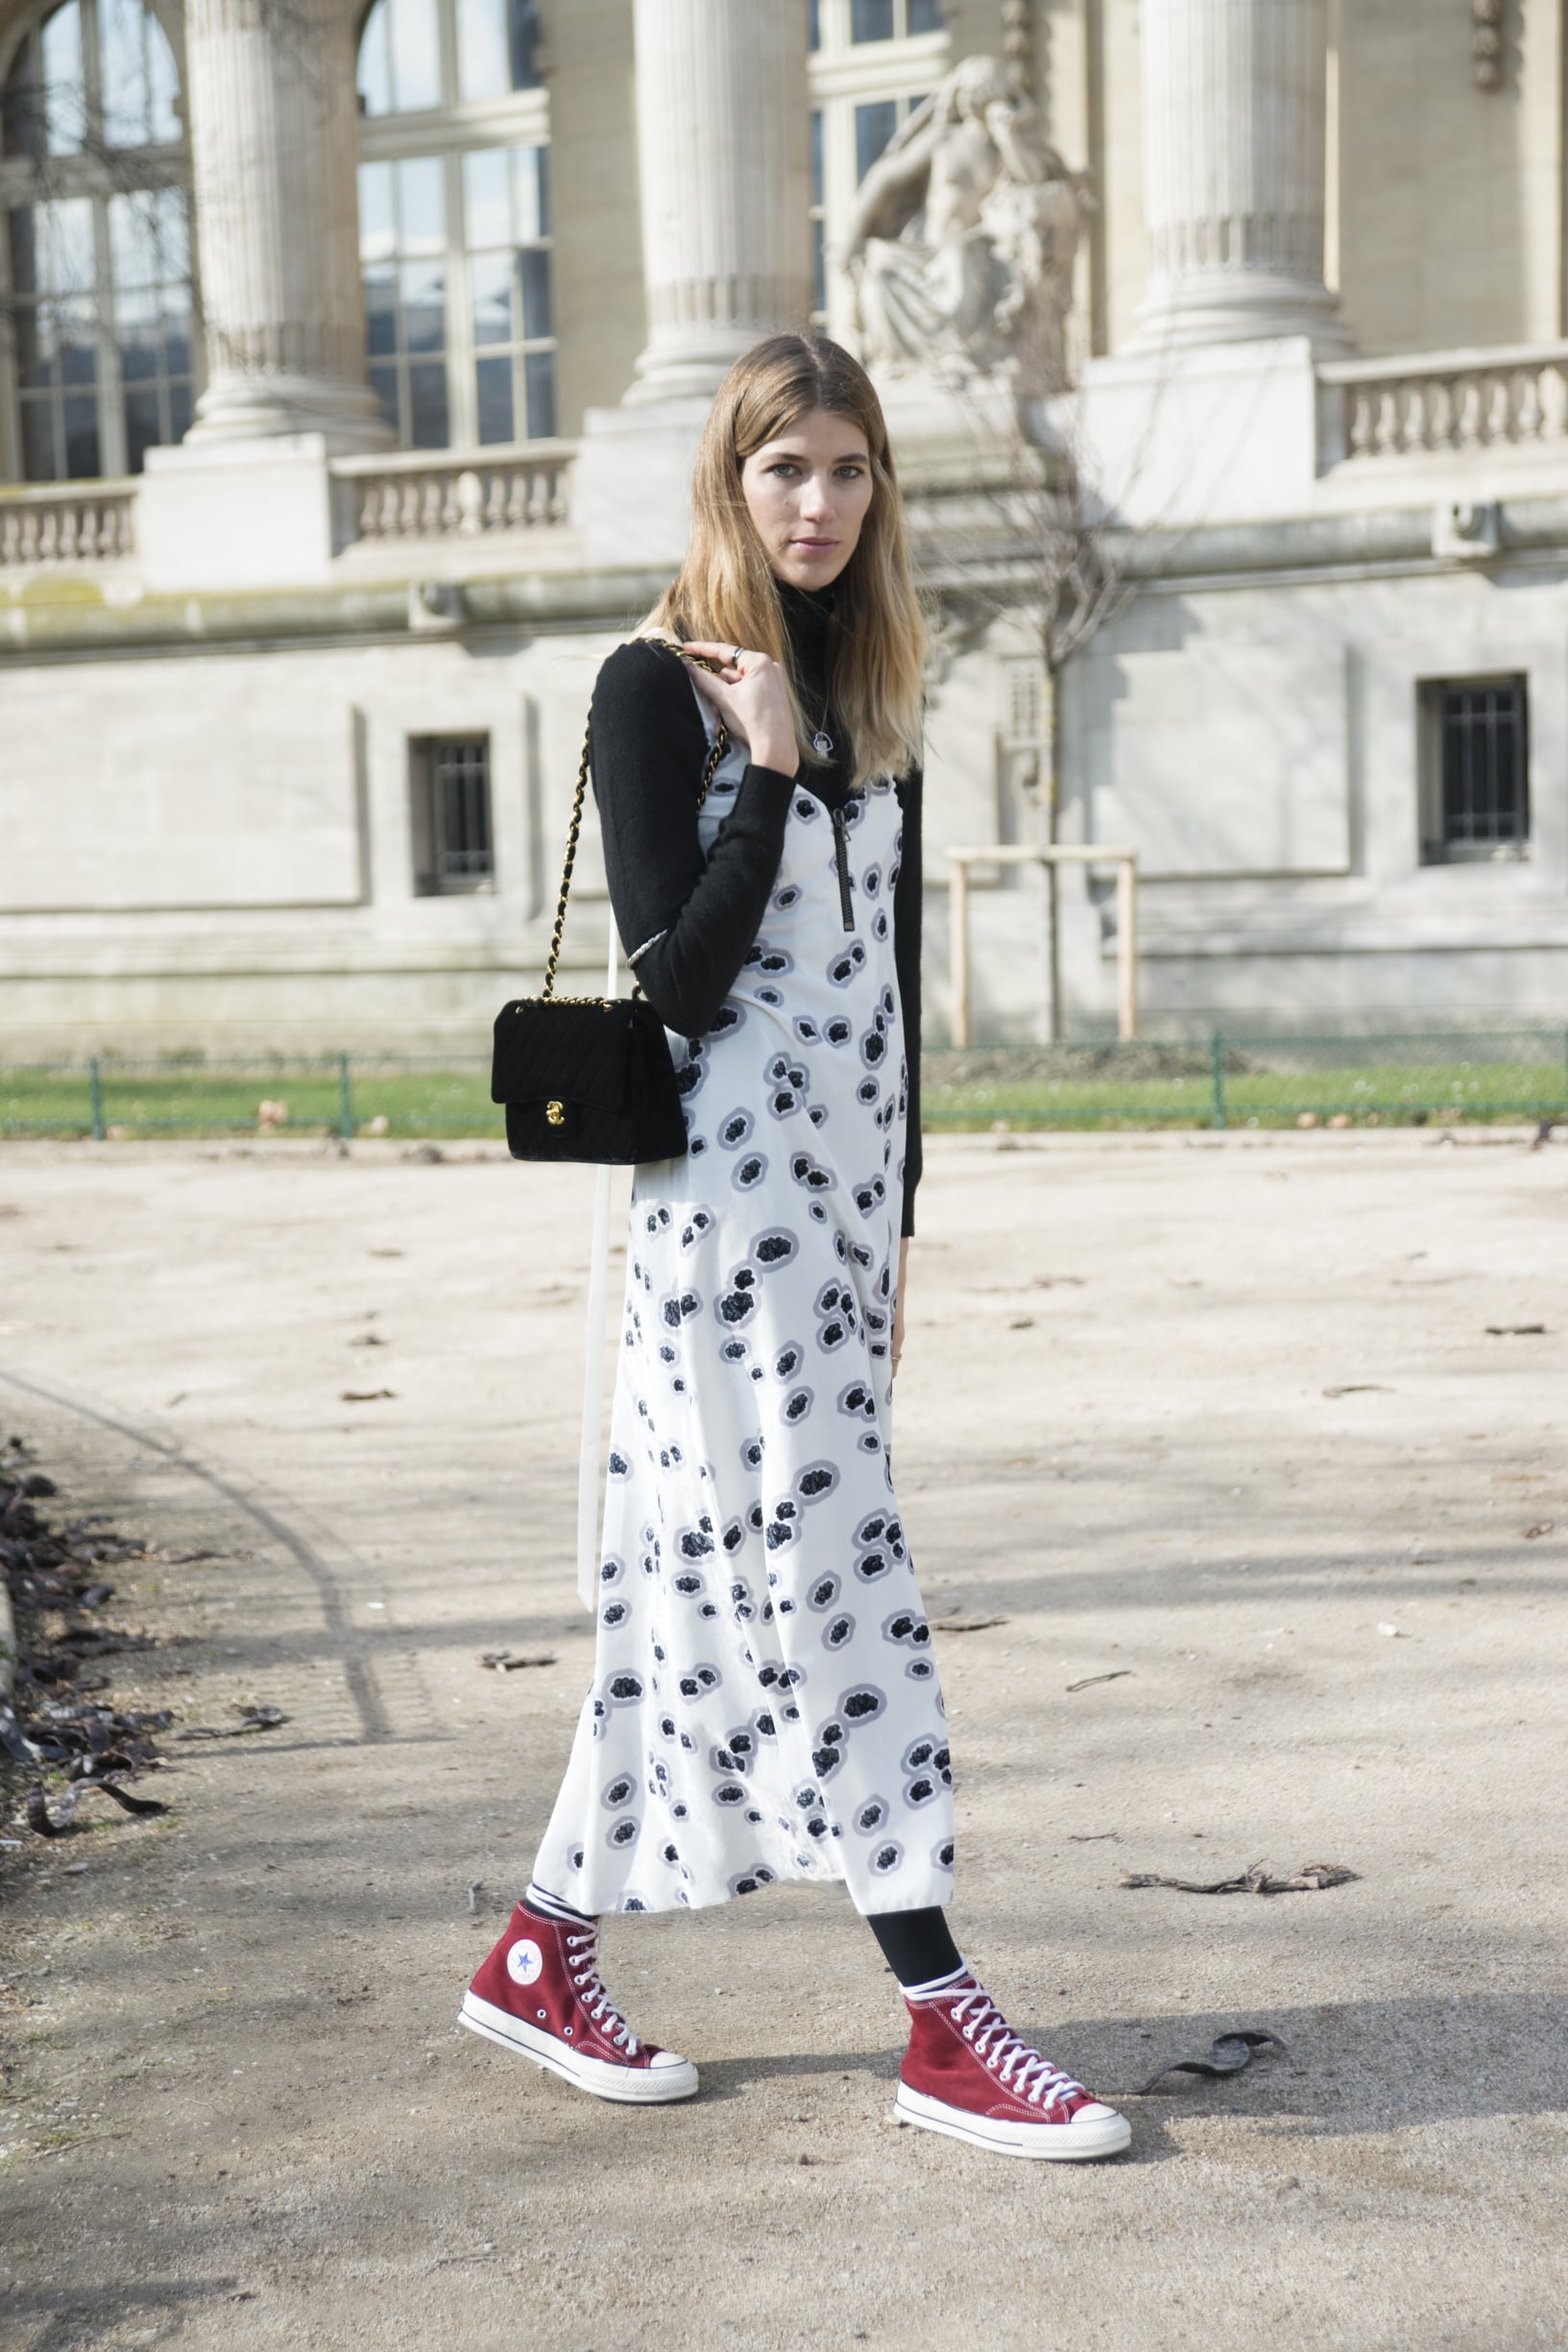 maxi dress with converse shoes